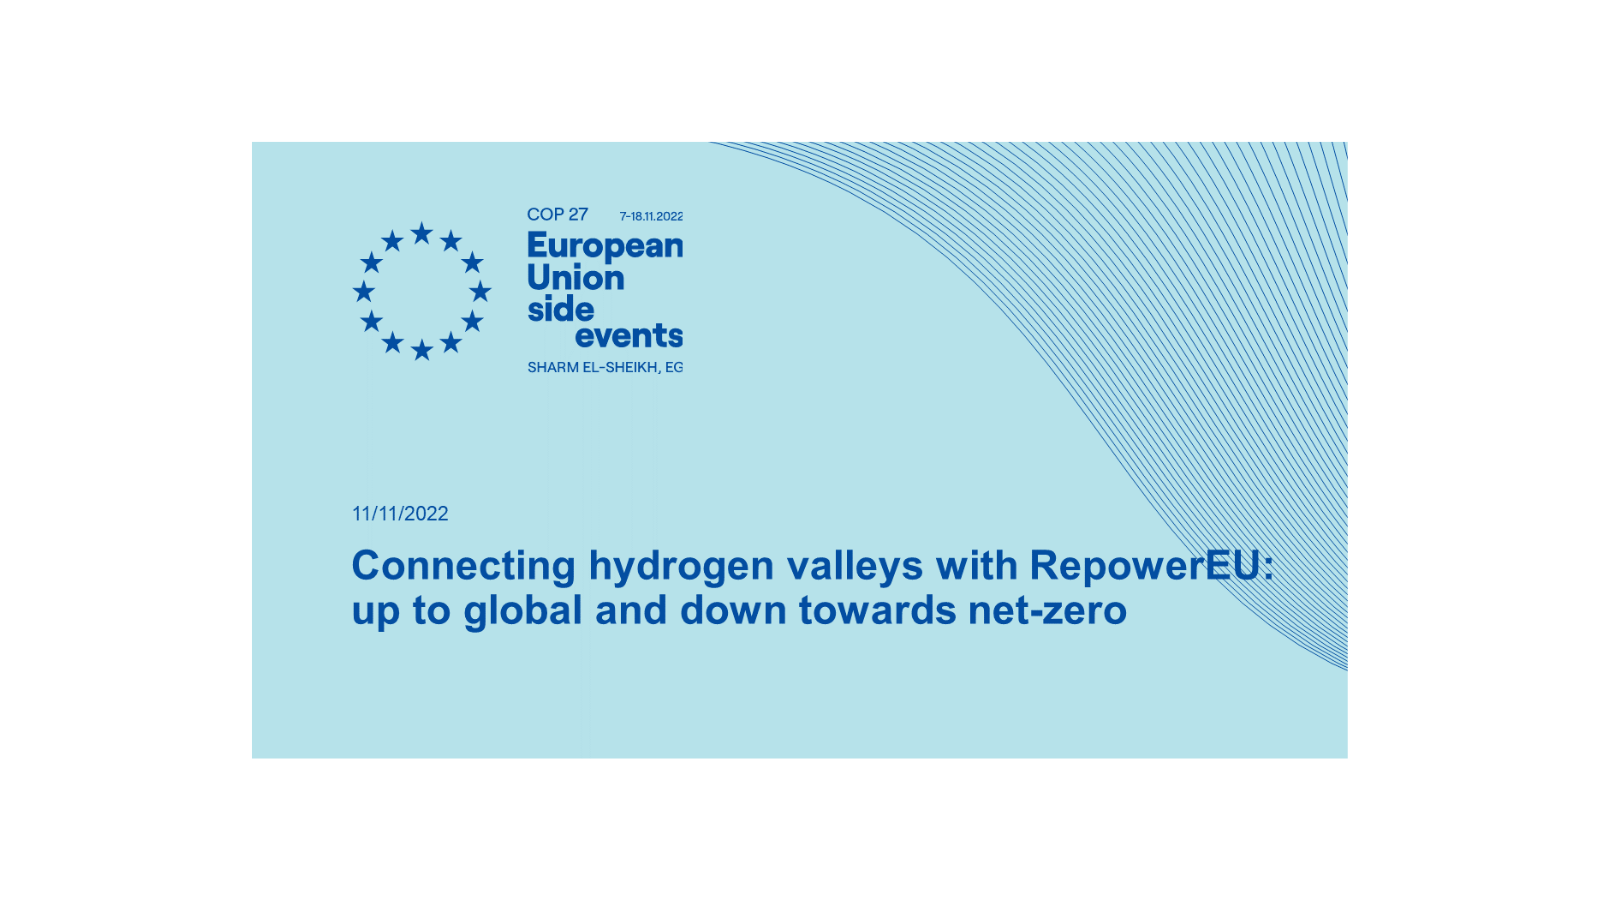 COP27 EU side event: Connecting hydrogen valleys with RepowerEU